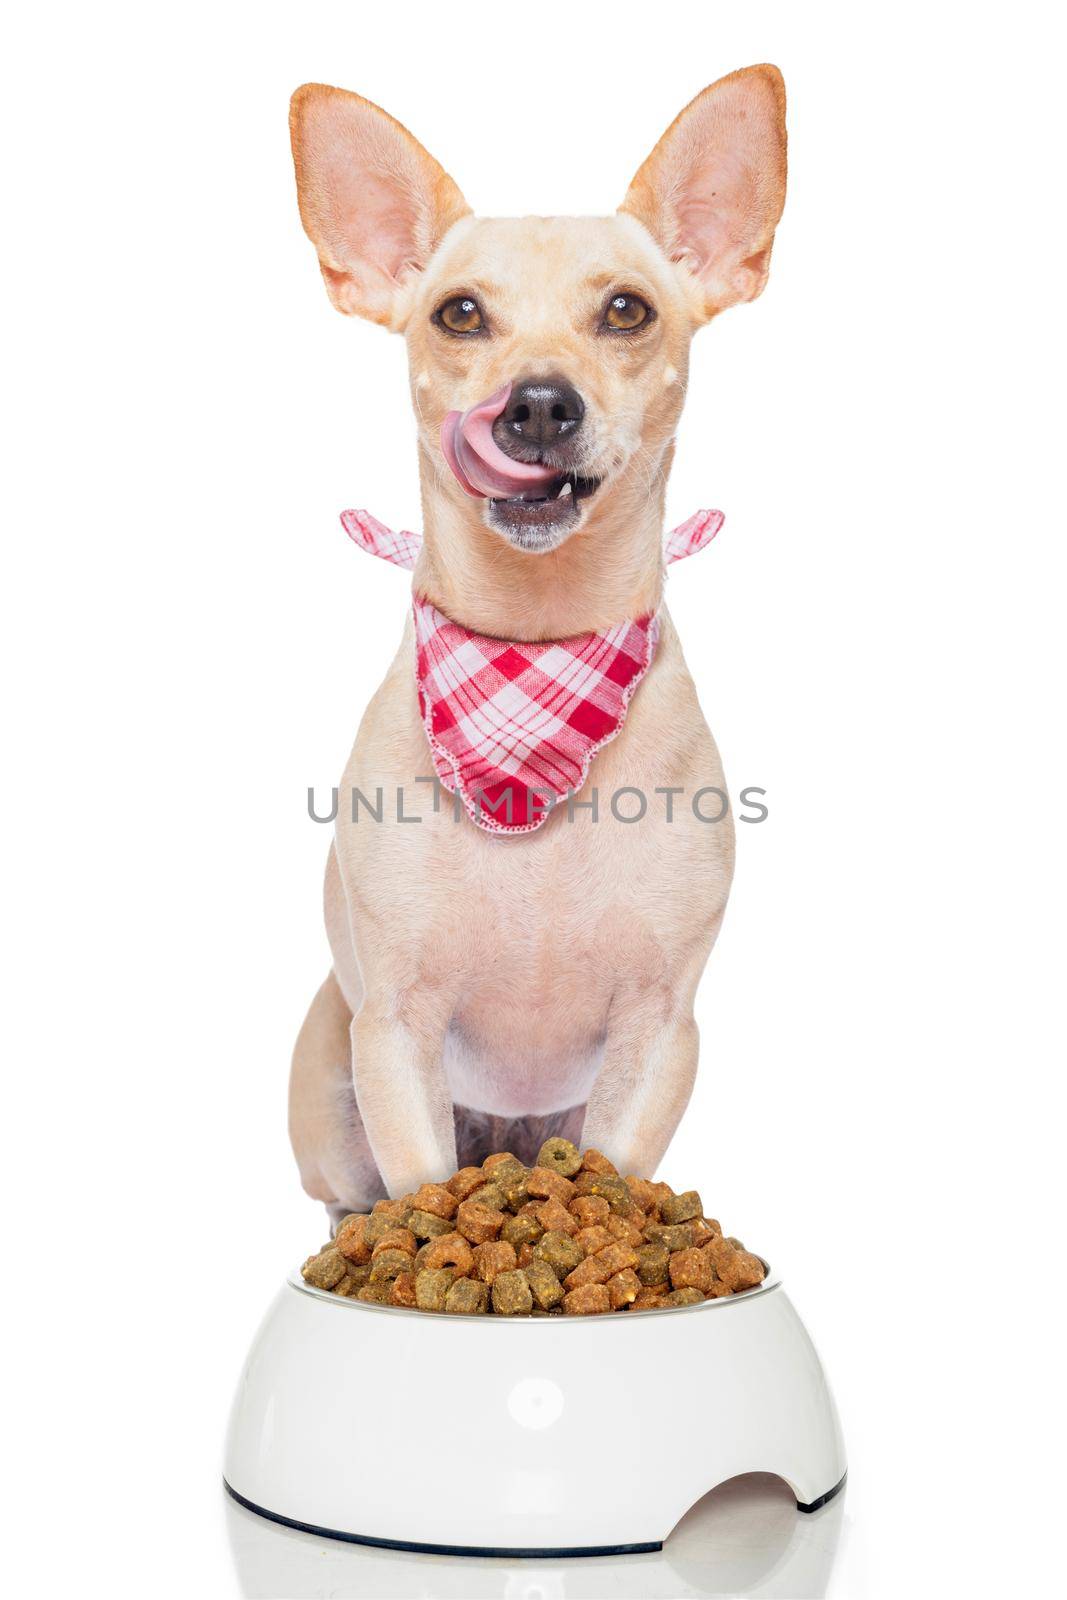 hungry terrier dog with a food bowl sticking out its tongue , isolated on white background